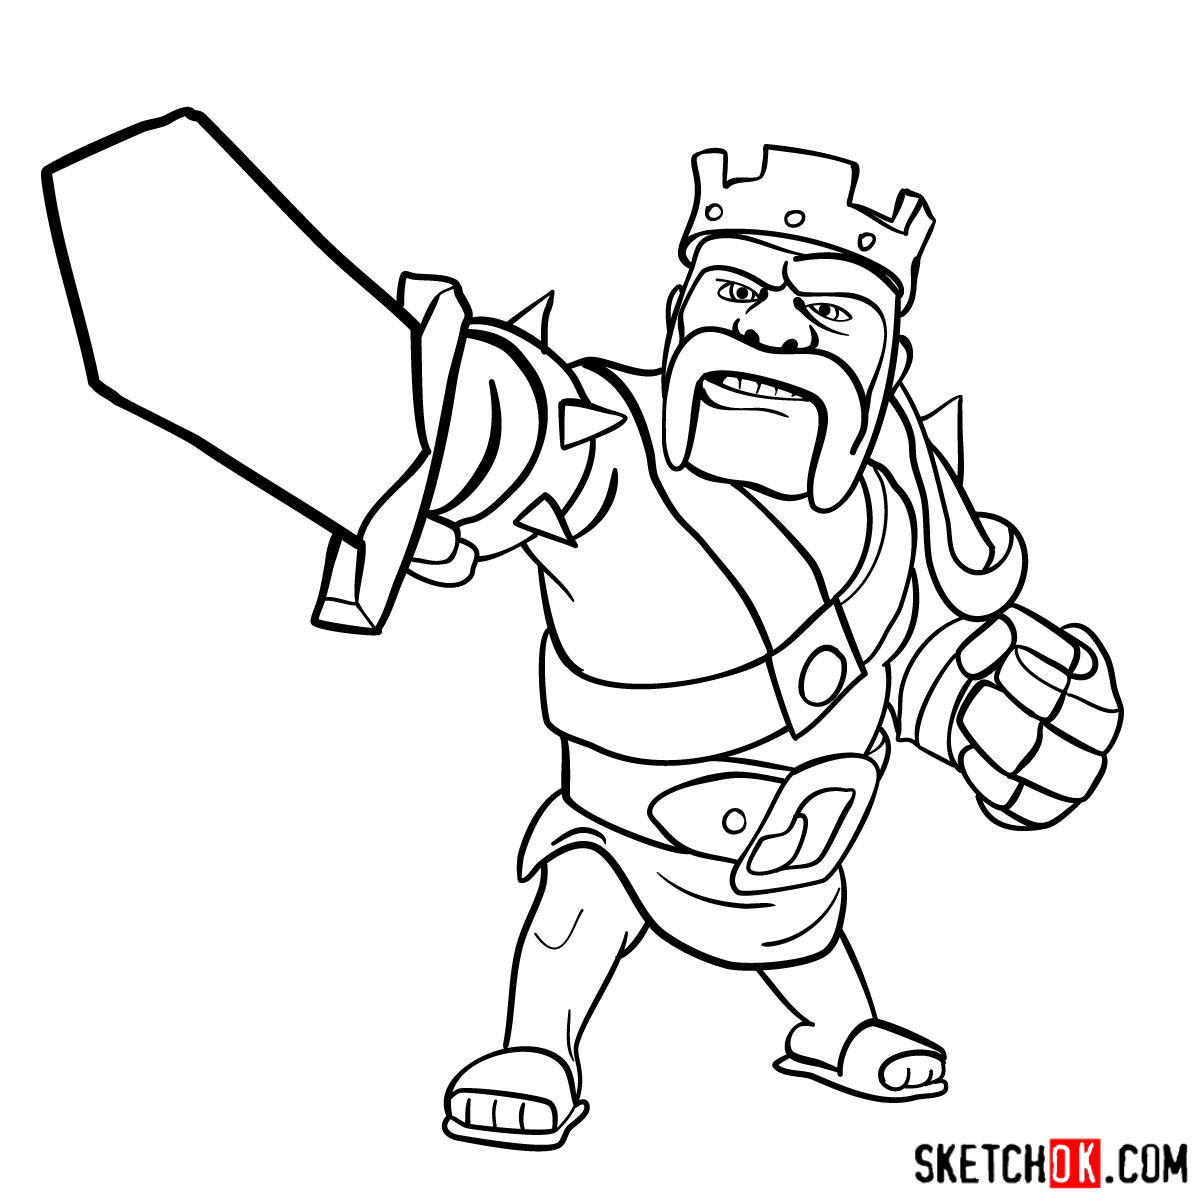 How to draw Barbarian King from CoC - step 13